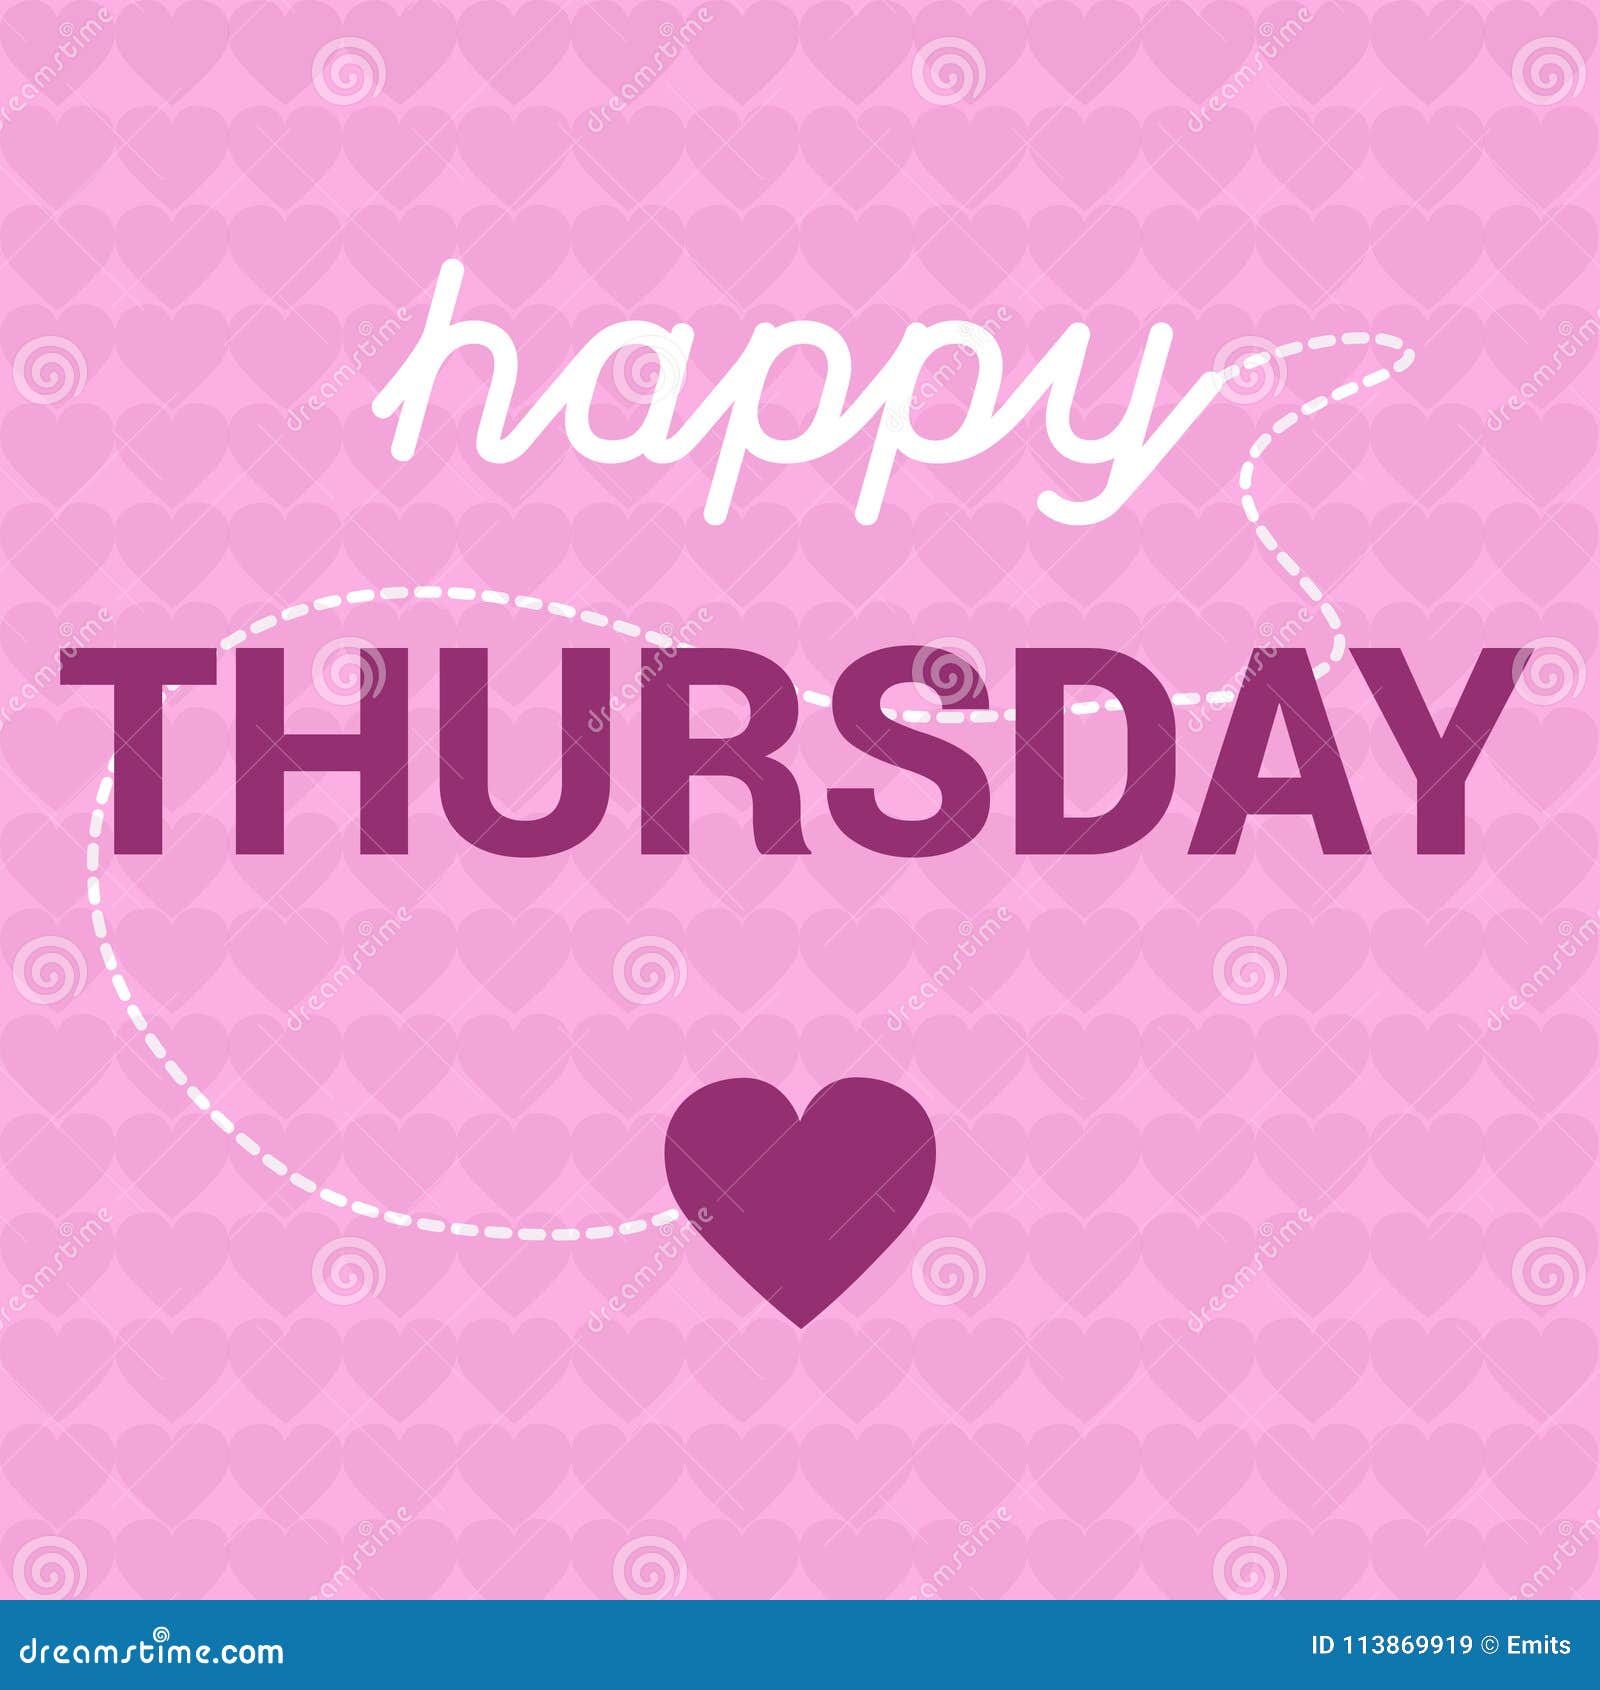 Happy Thursday Motivation with Hearts Message Concept Stock ...